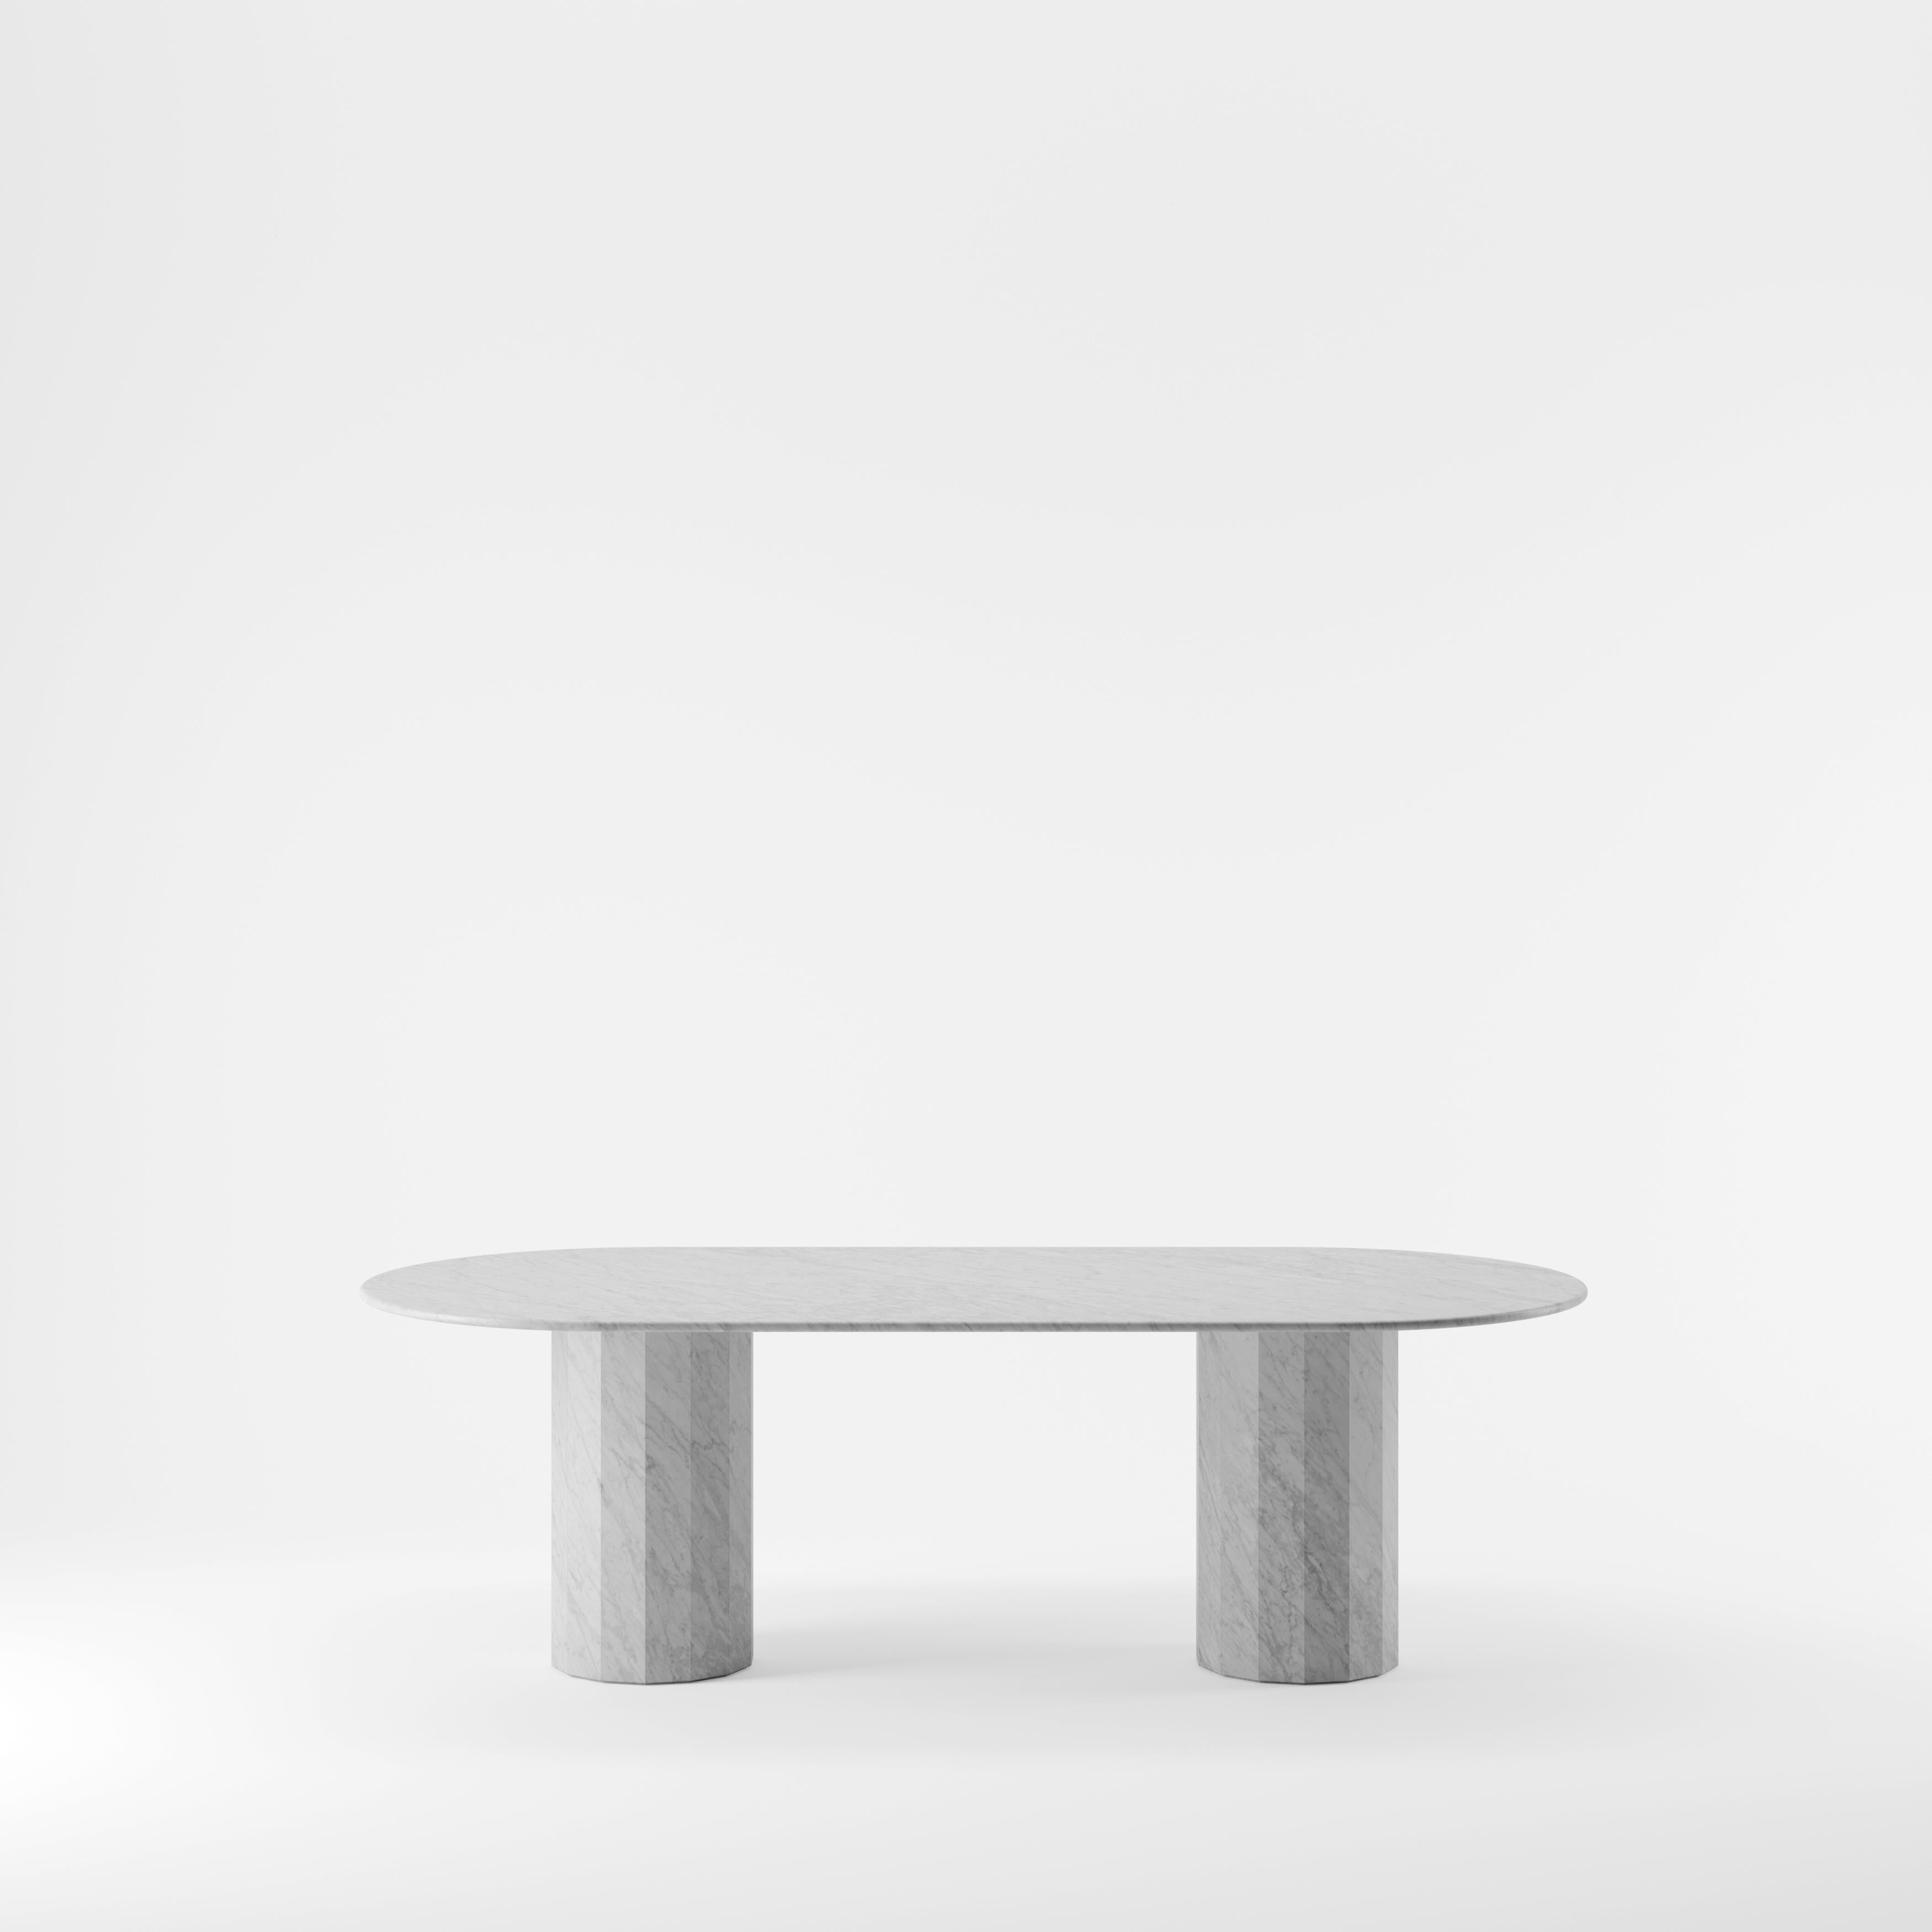 Minimalist Ashby Oval Dining Table in Honed Bianco Carrara Marble